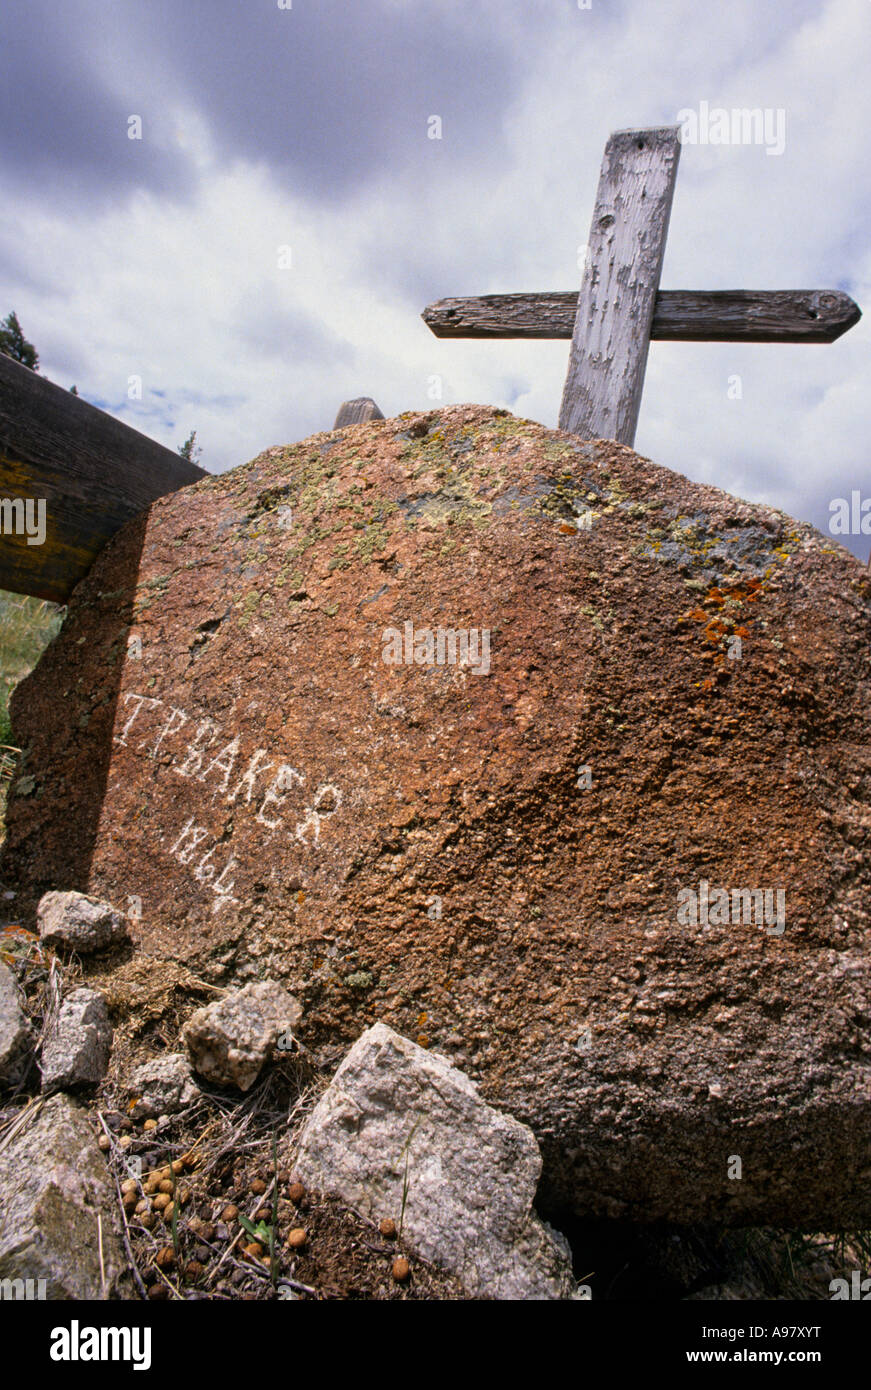 GRAVE IS PRESERVED ALONG THE OREGON TRAIL NEAR SUN RANCH, WYOMING. Stock Photo